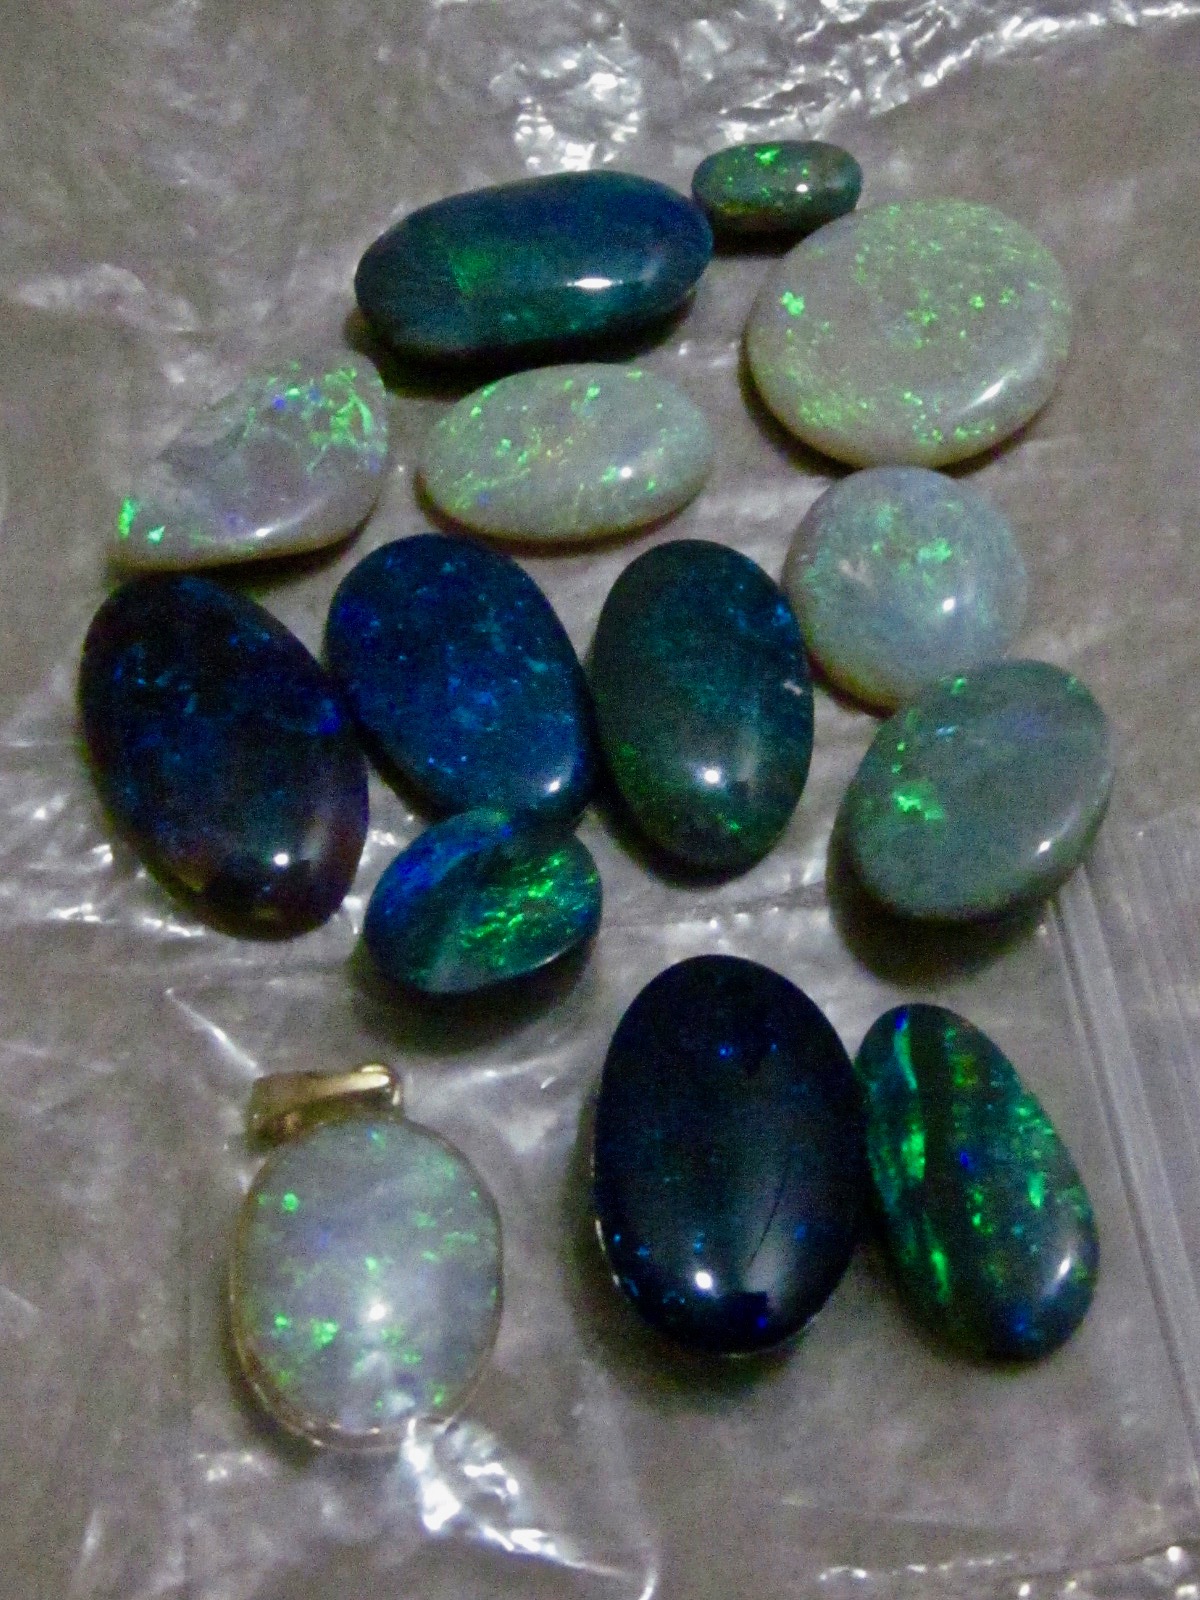 Opal rings from official Government Heritage site in Australia.